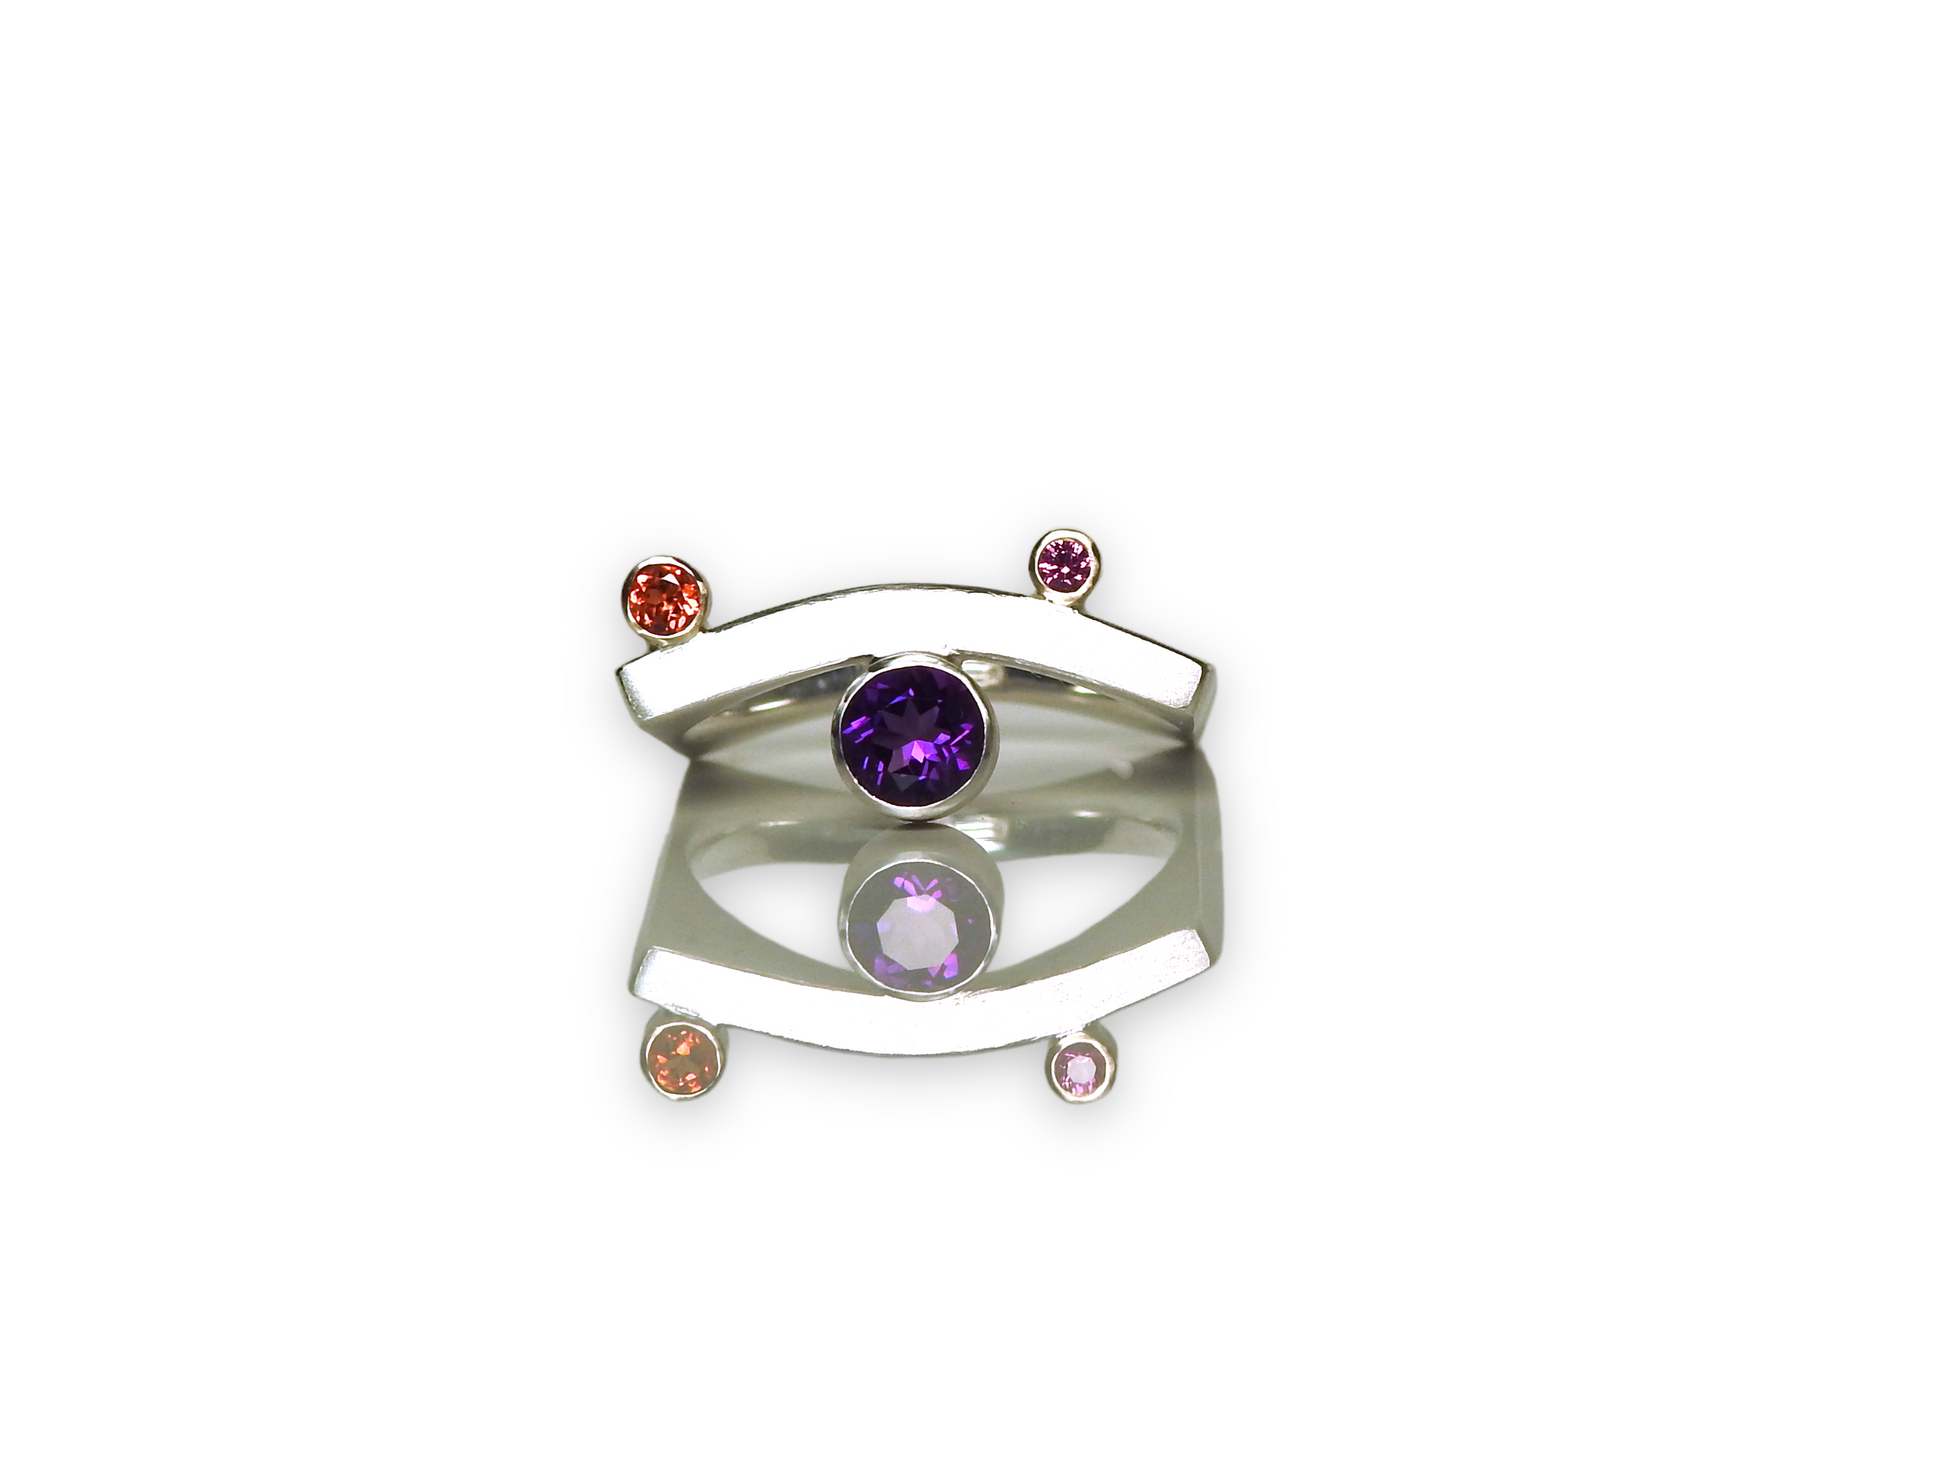 Square band outside round inside with a soft curve, bezel set gems floating on either side of the ring.  Great for stacking or on its own., by ZEALmetal, Nicole Horlor, in Kingston, ON, Canada